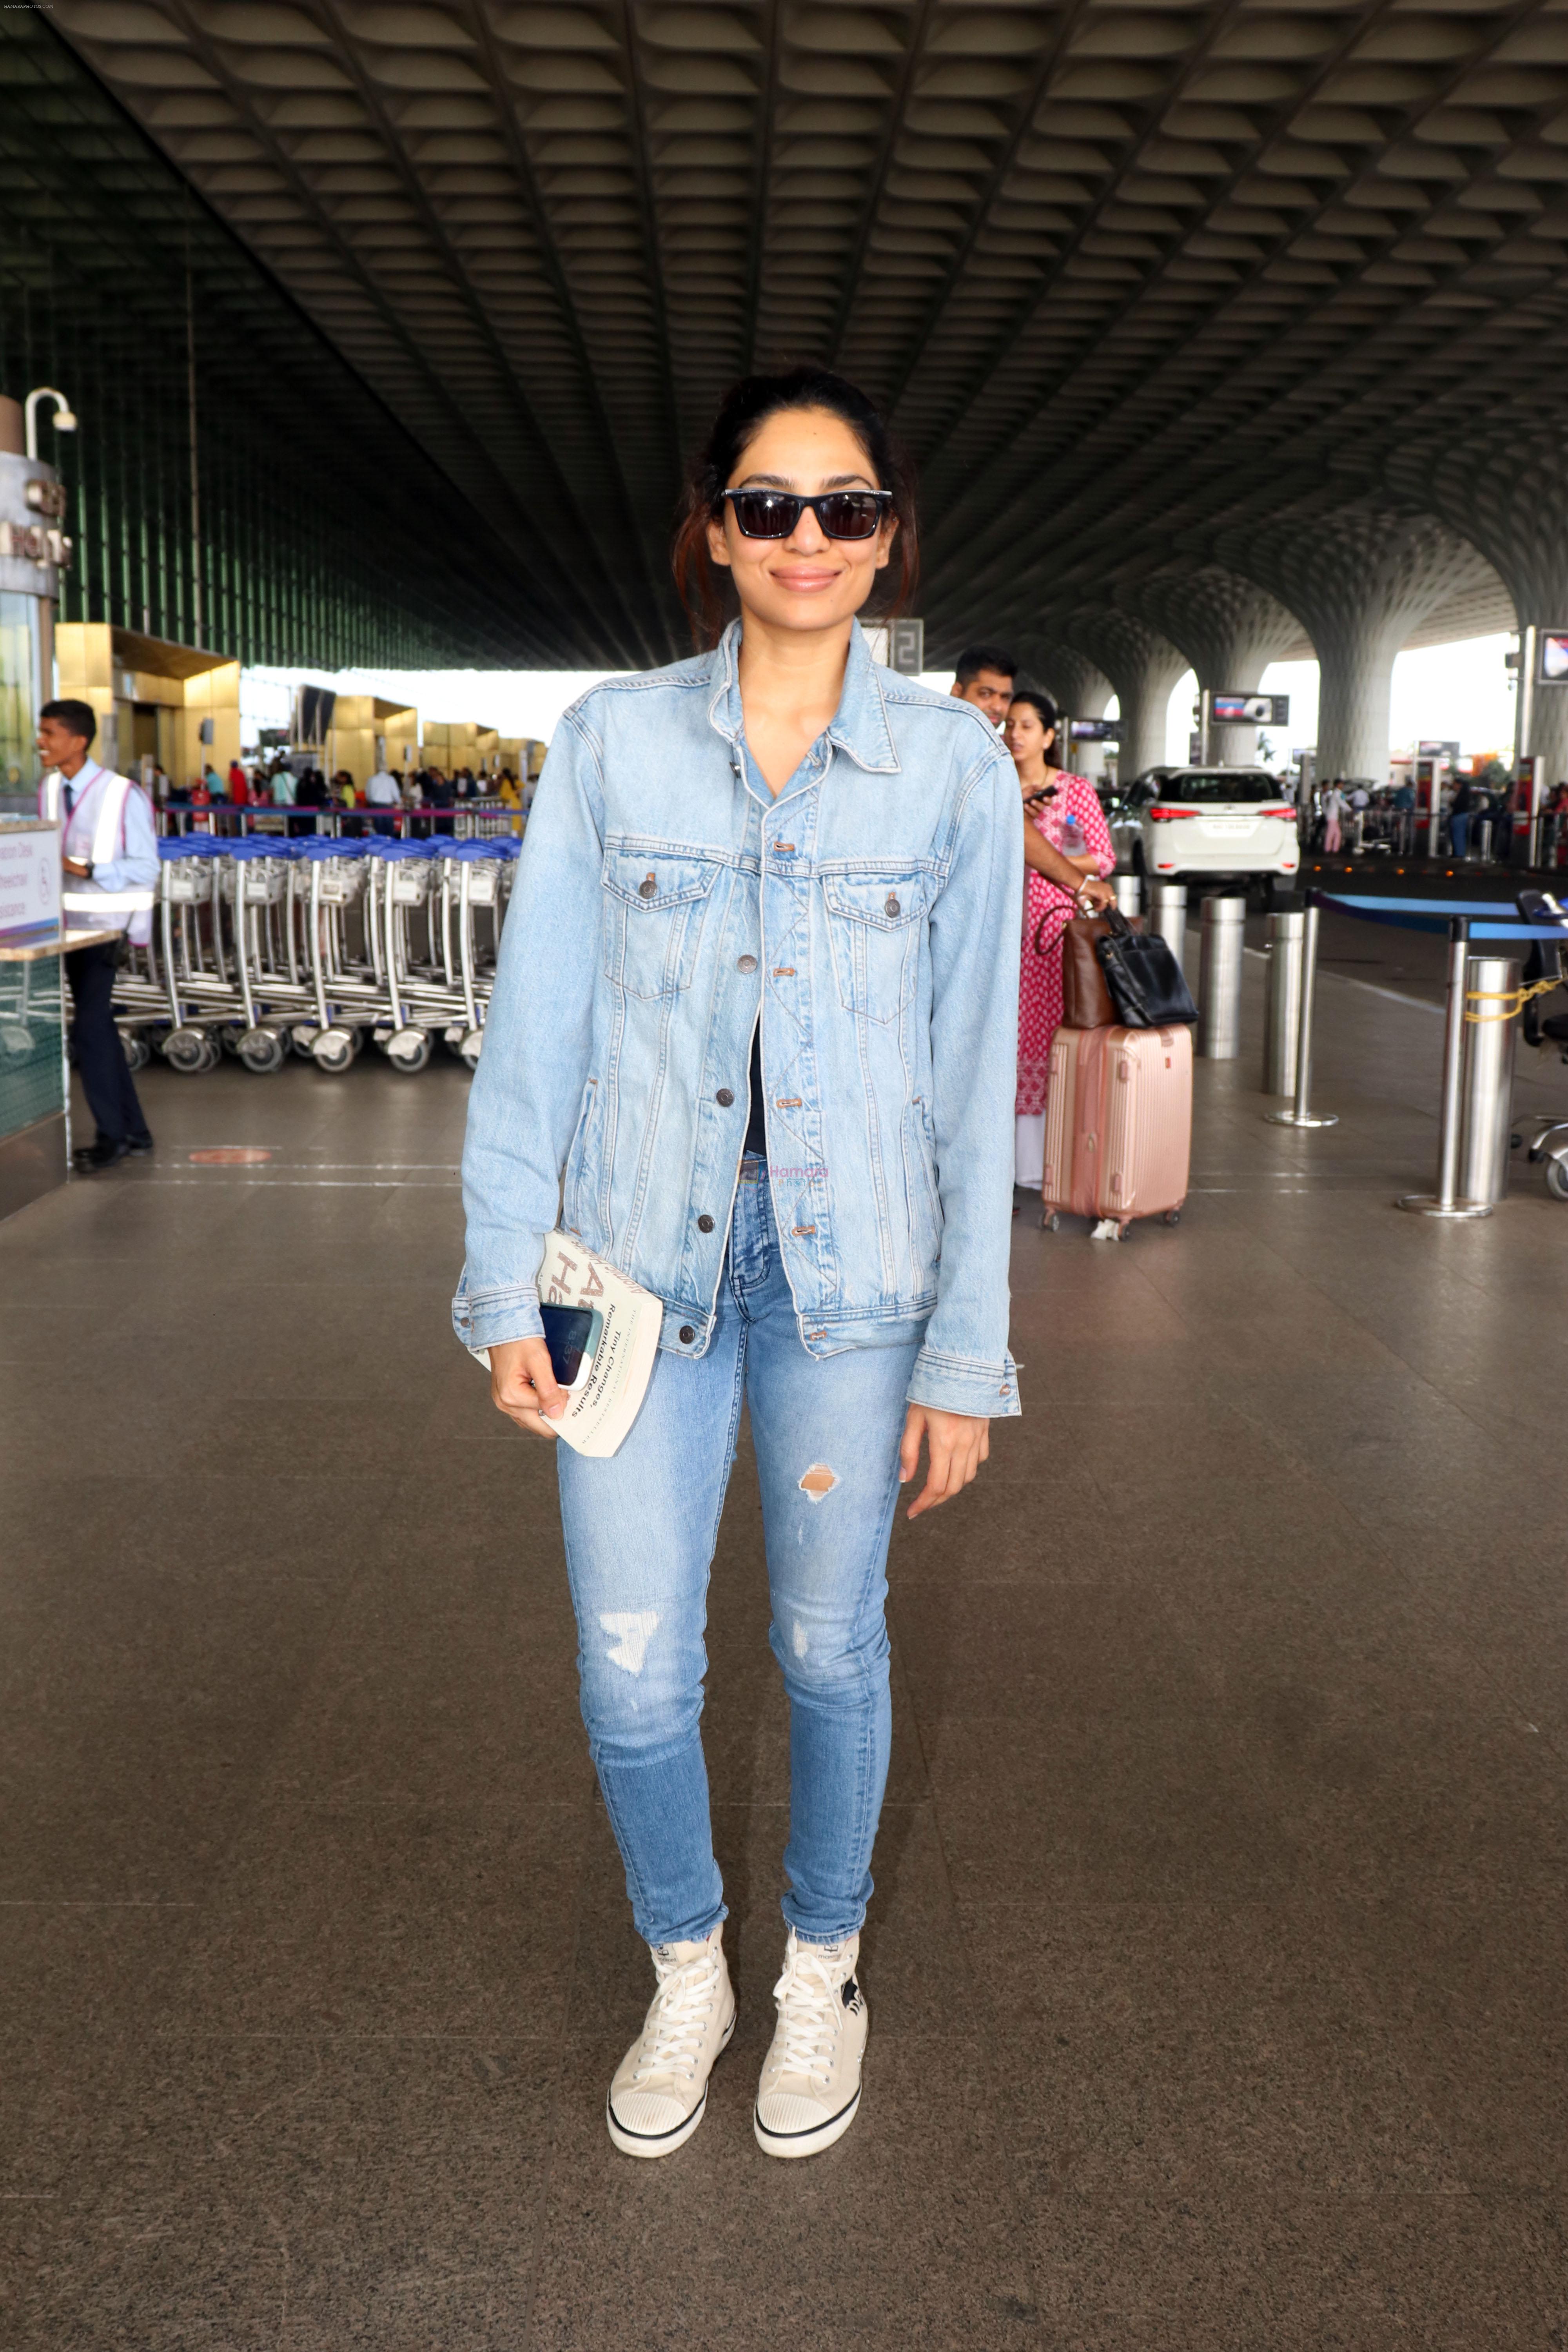 Sobhita Dhulipala dressed in Jeans top and pants wearing sunglasses holding Atmoic Habits by James Clear